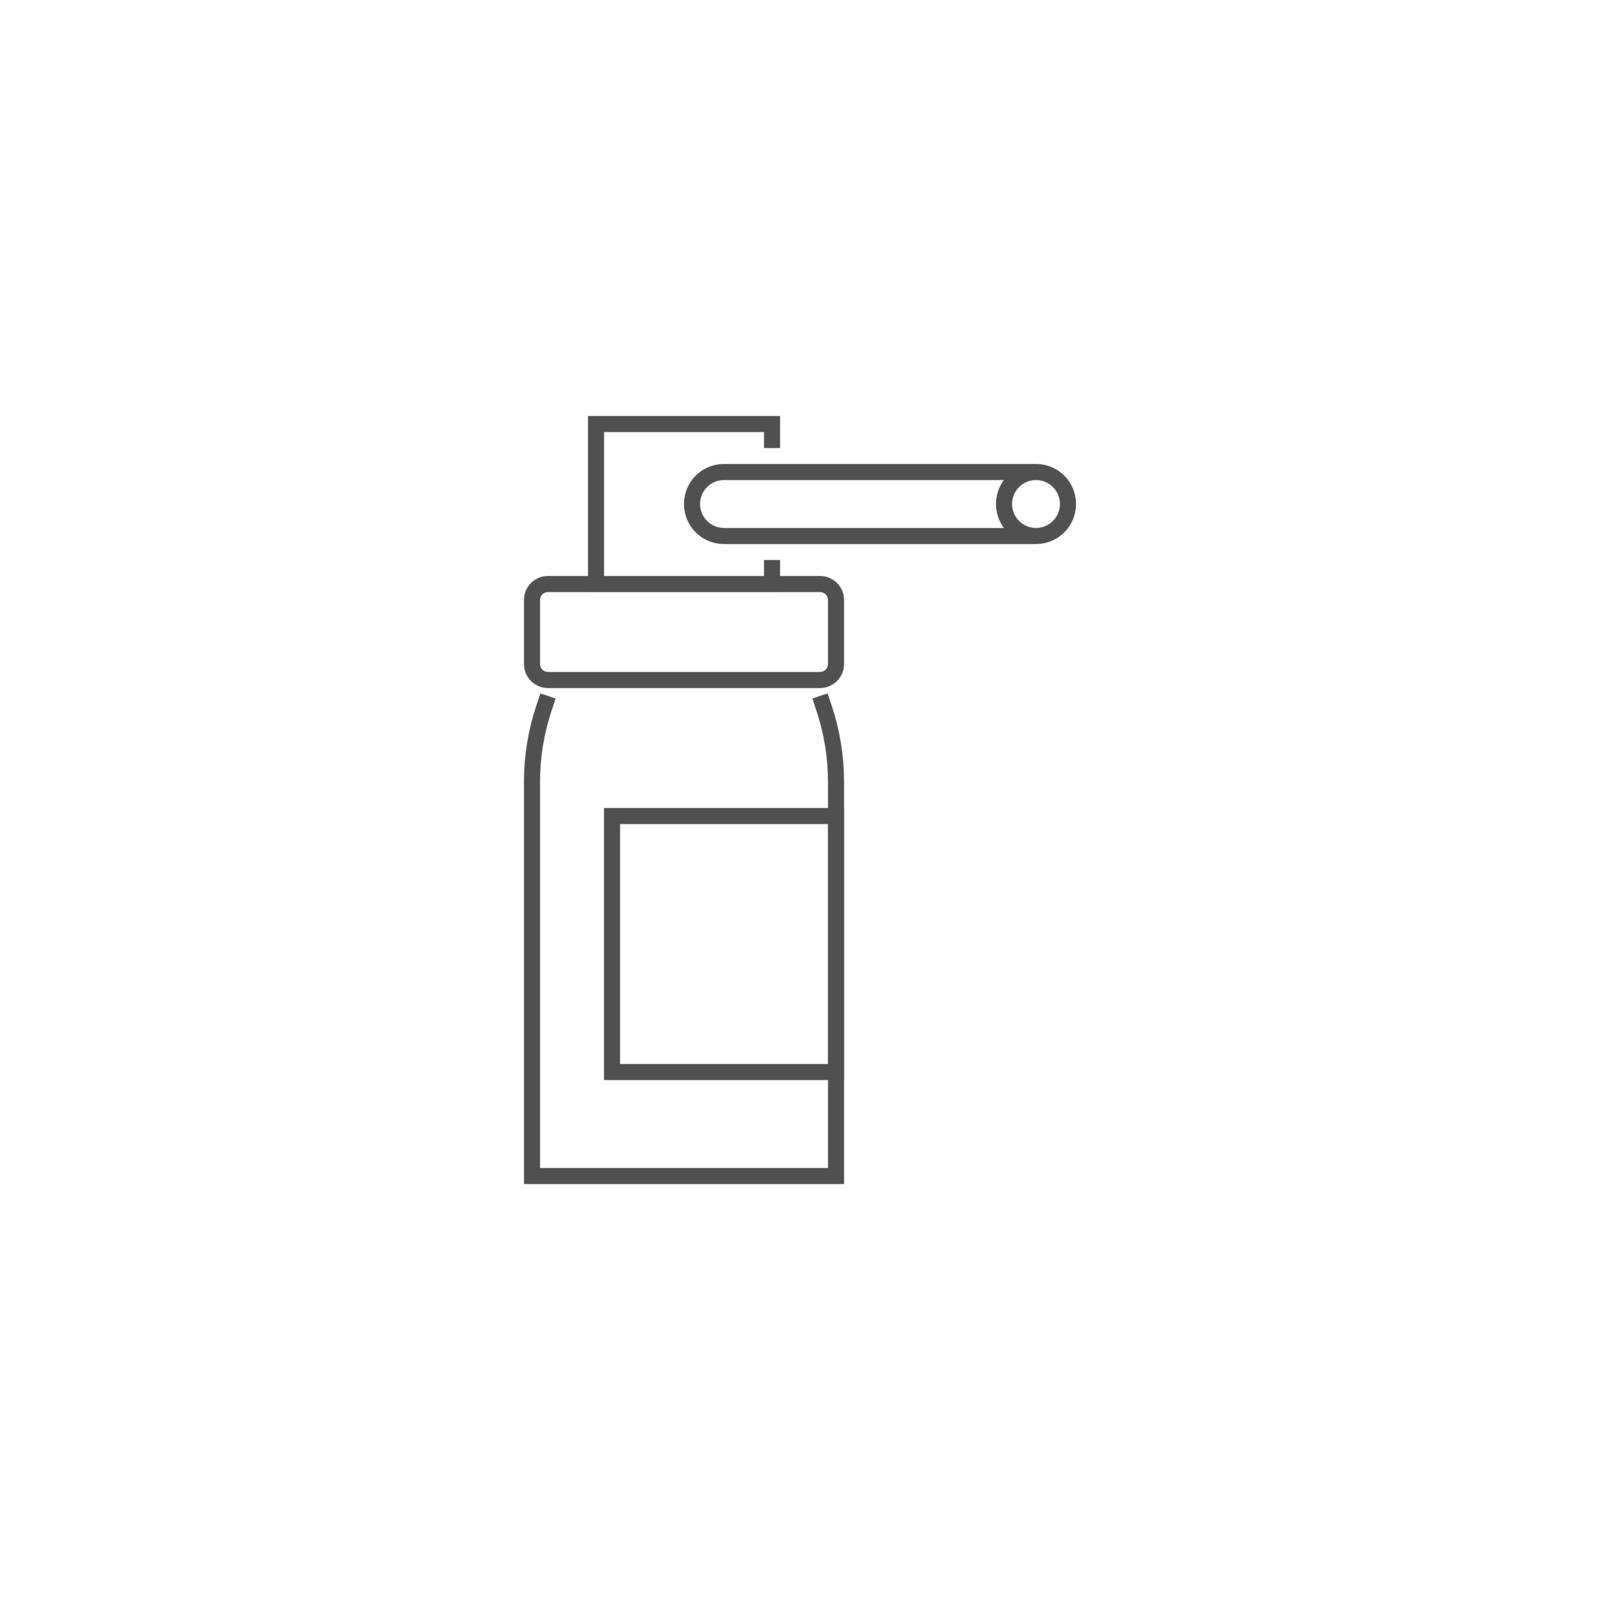 Bottle of Spray Related Vector Line Icon. Drugs. Isolated on White Background. Editable Stroke.